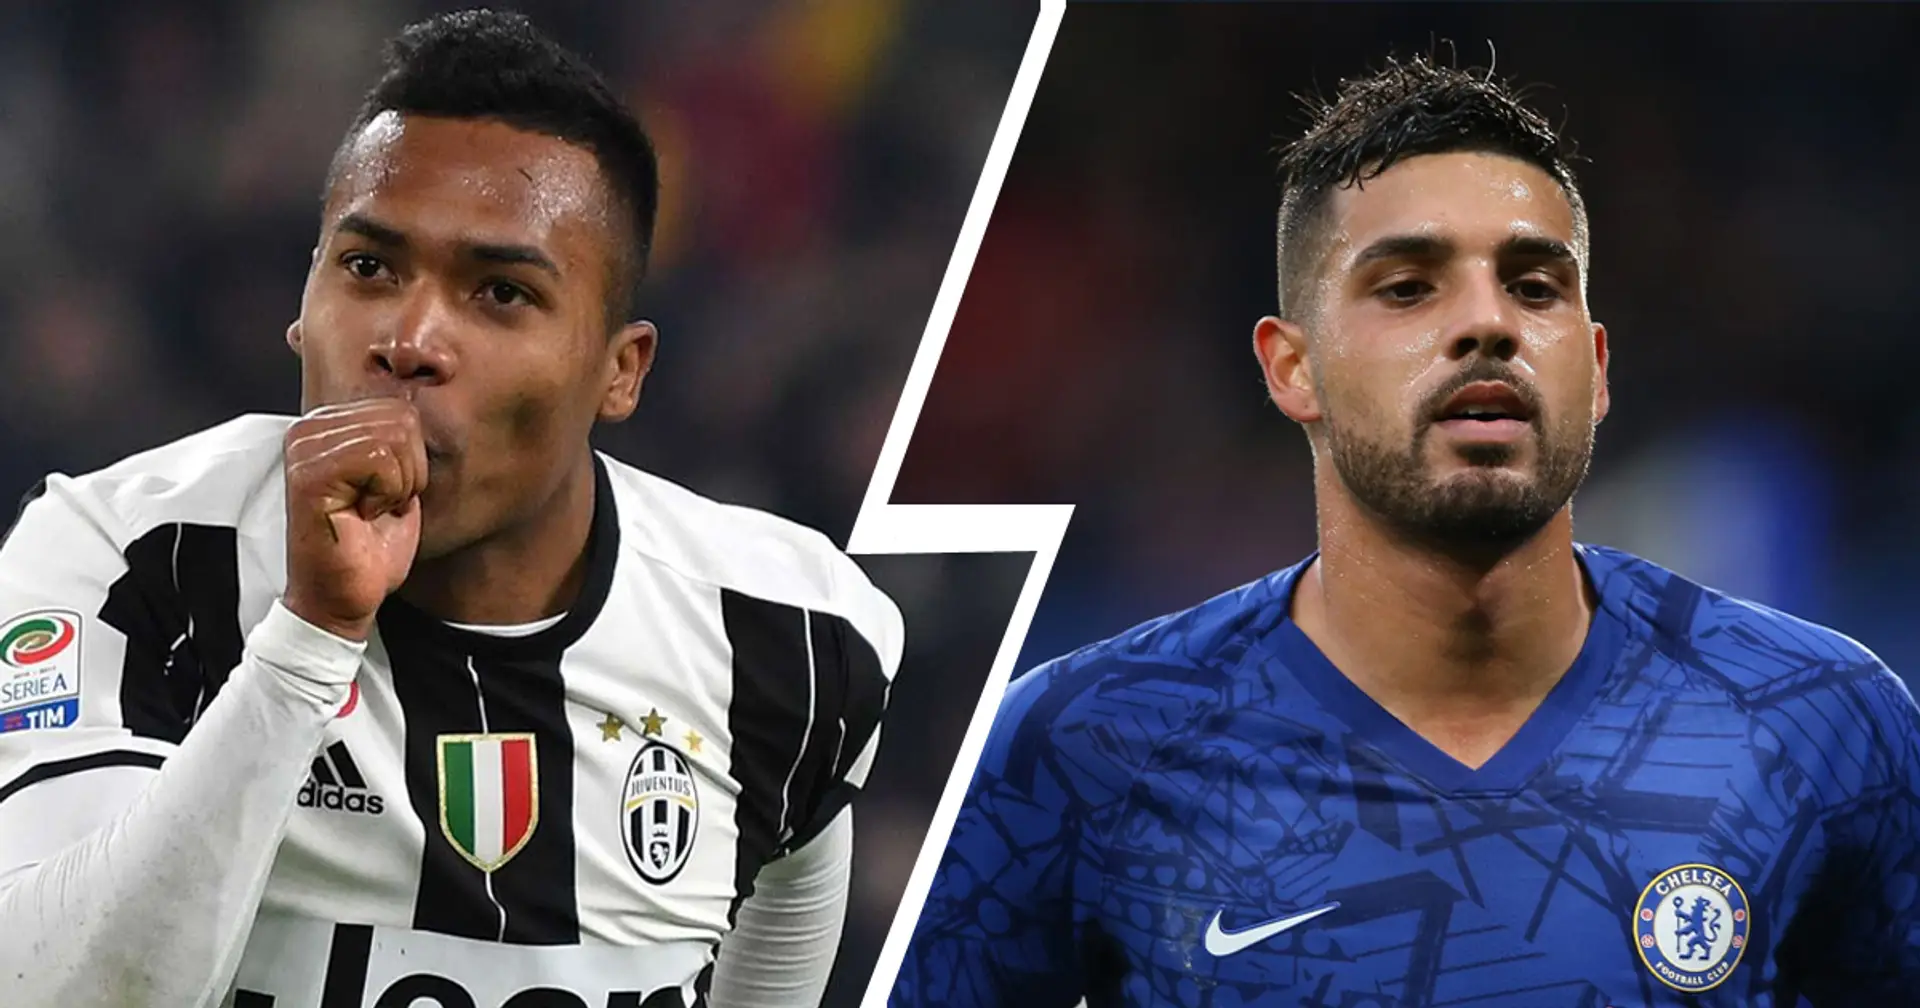 Juventus reportedly ready to offer Alex Sandro as part of Emerson deal